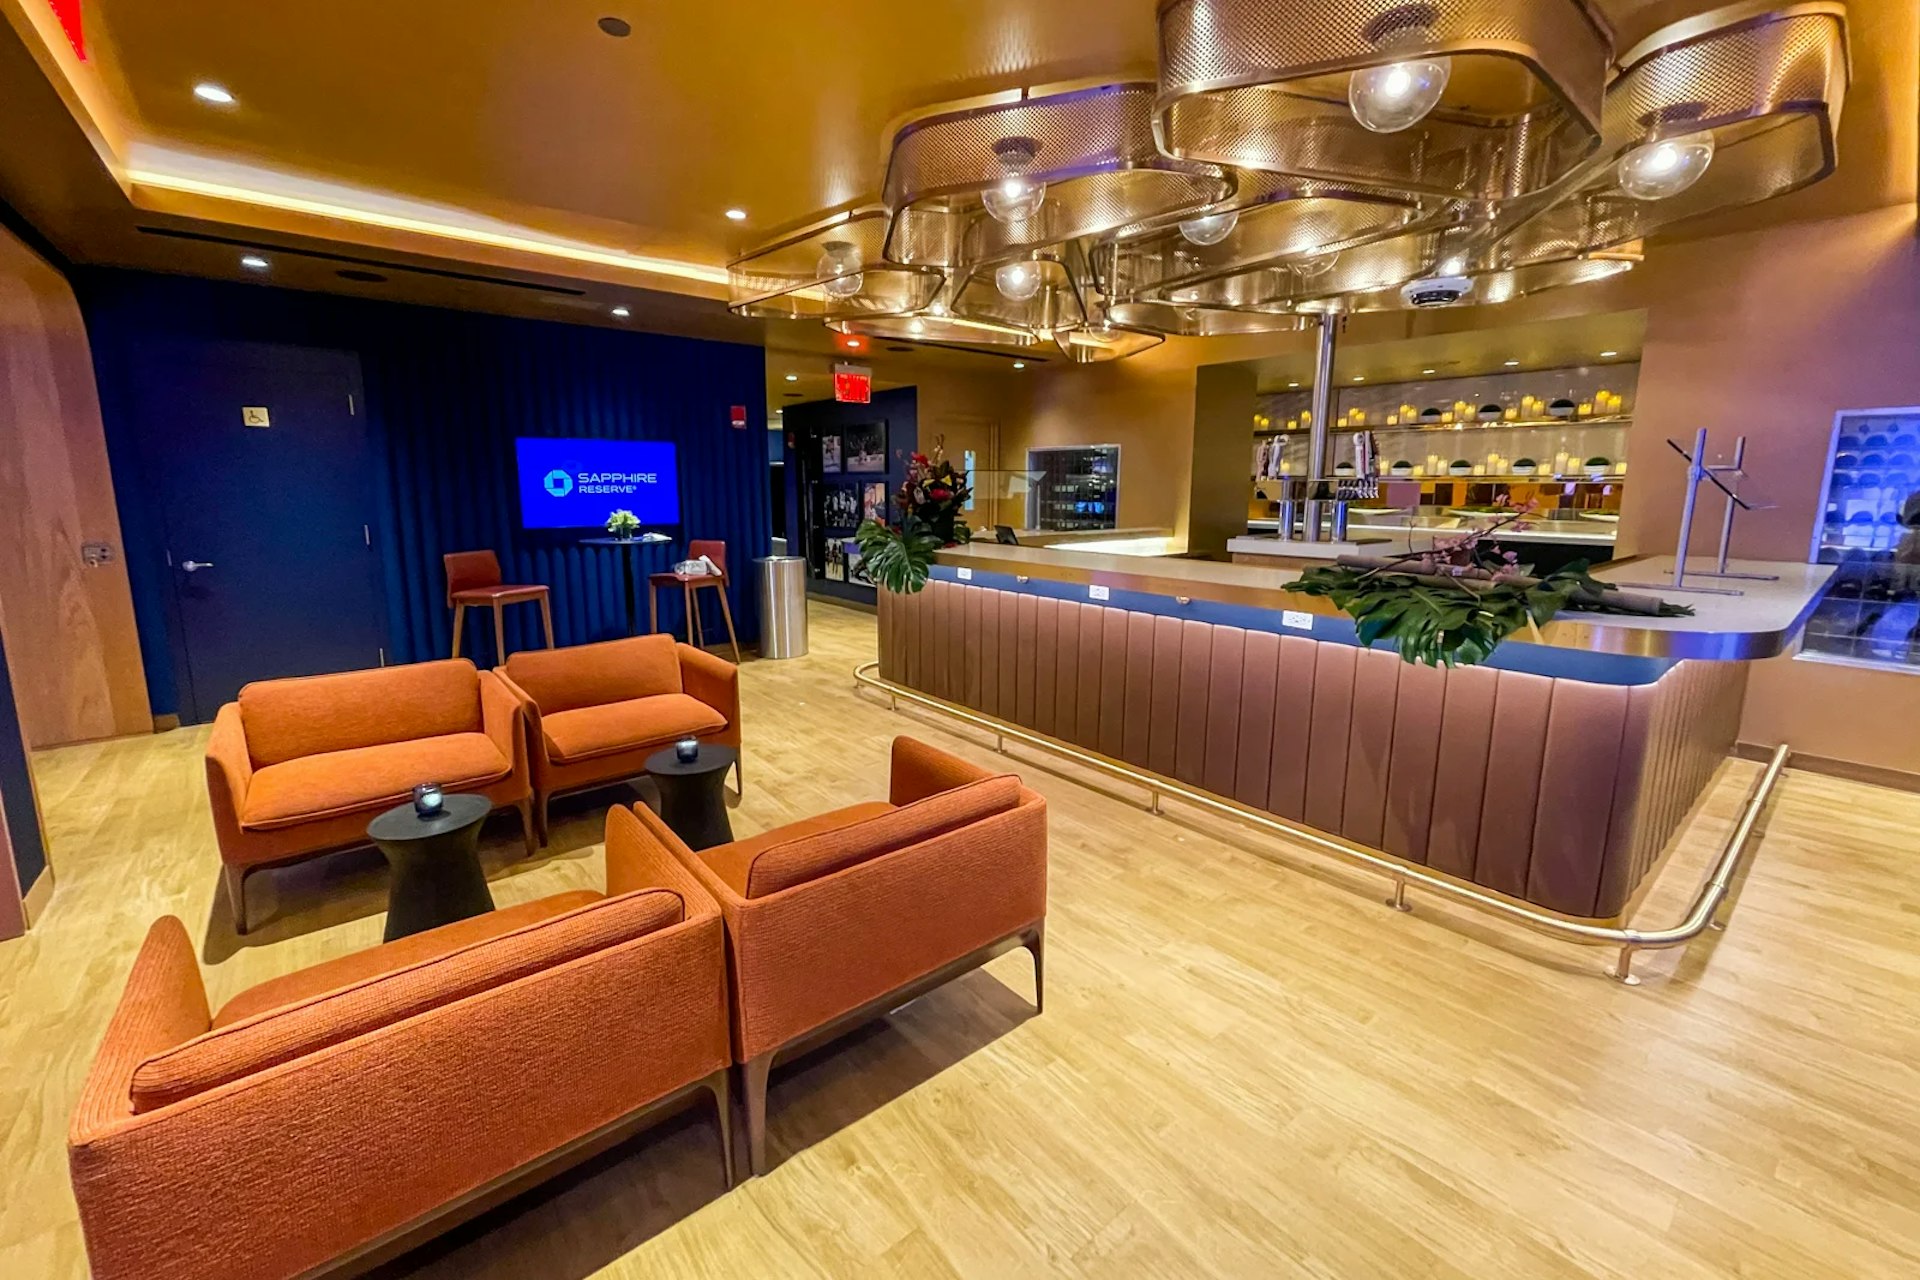 The Chase Sapphire Reserve Lounge at Madison Square Garden